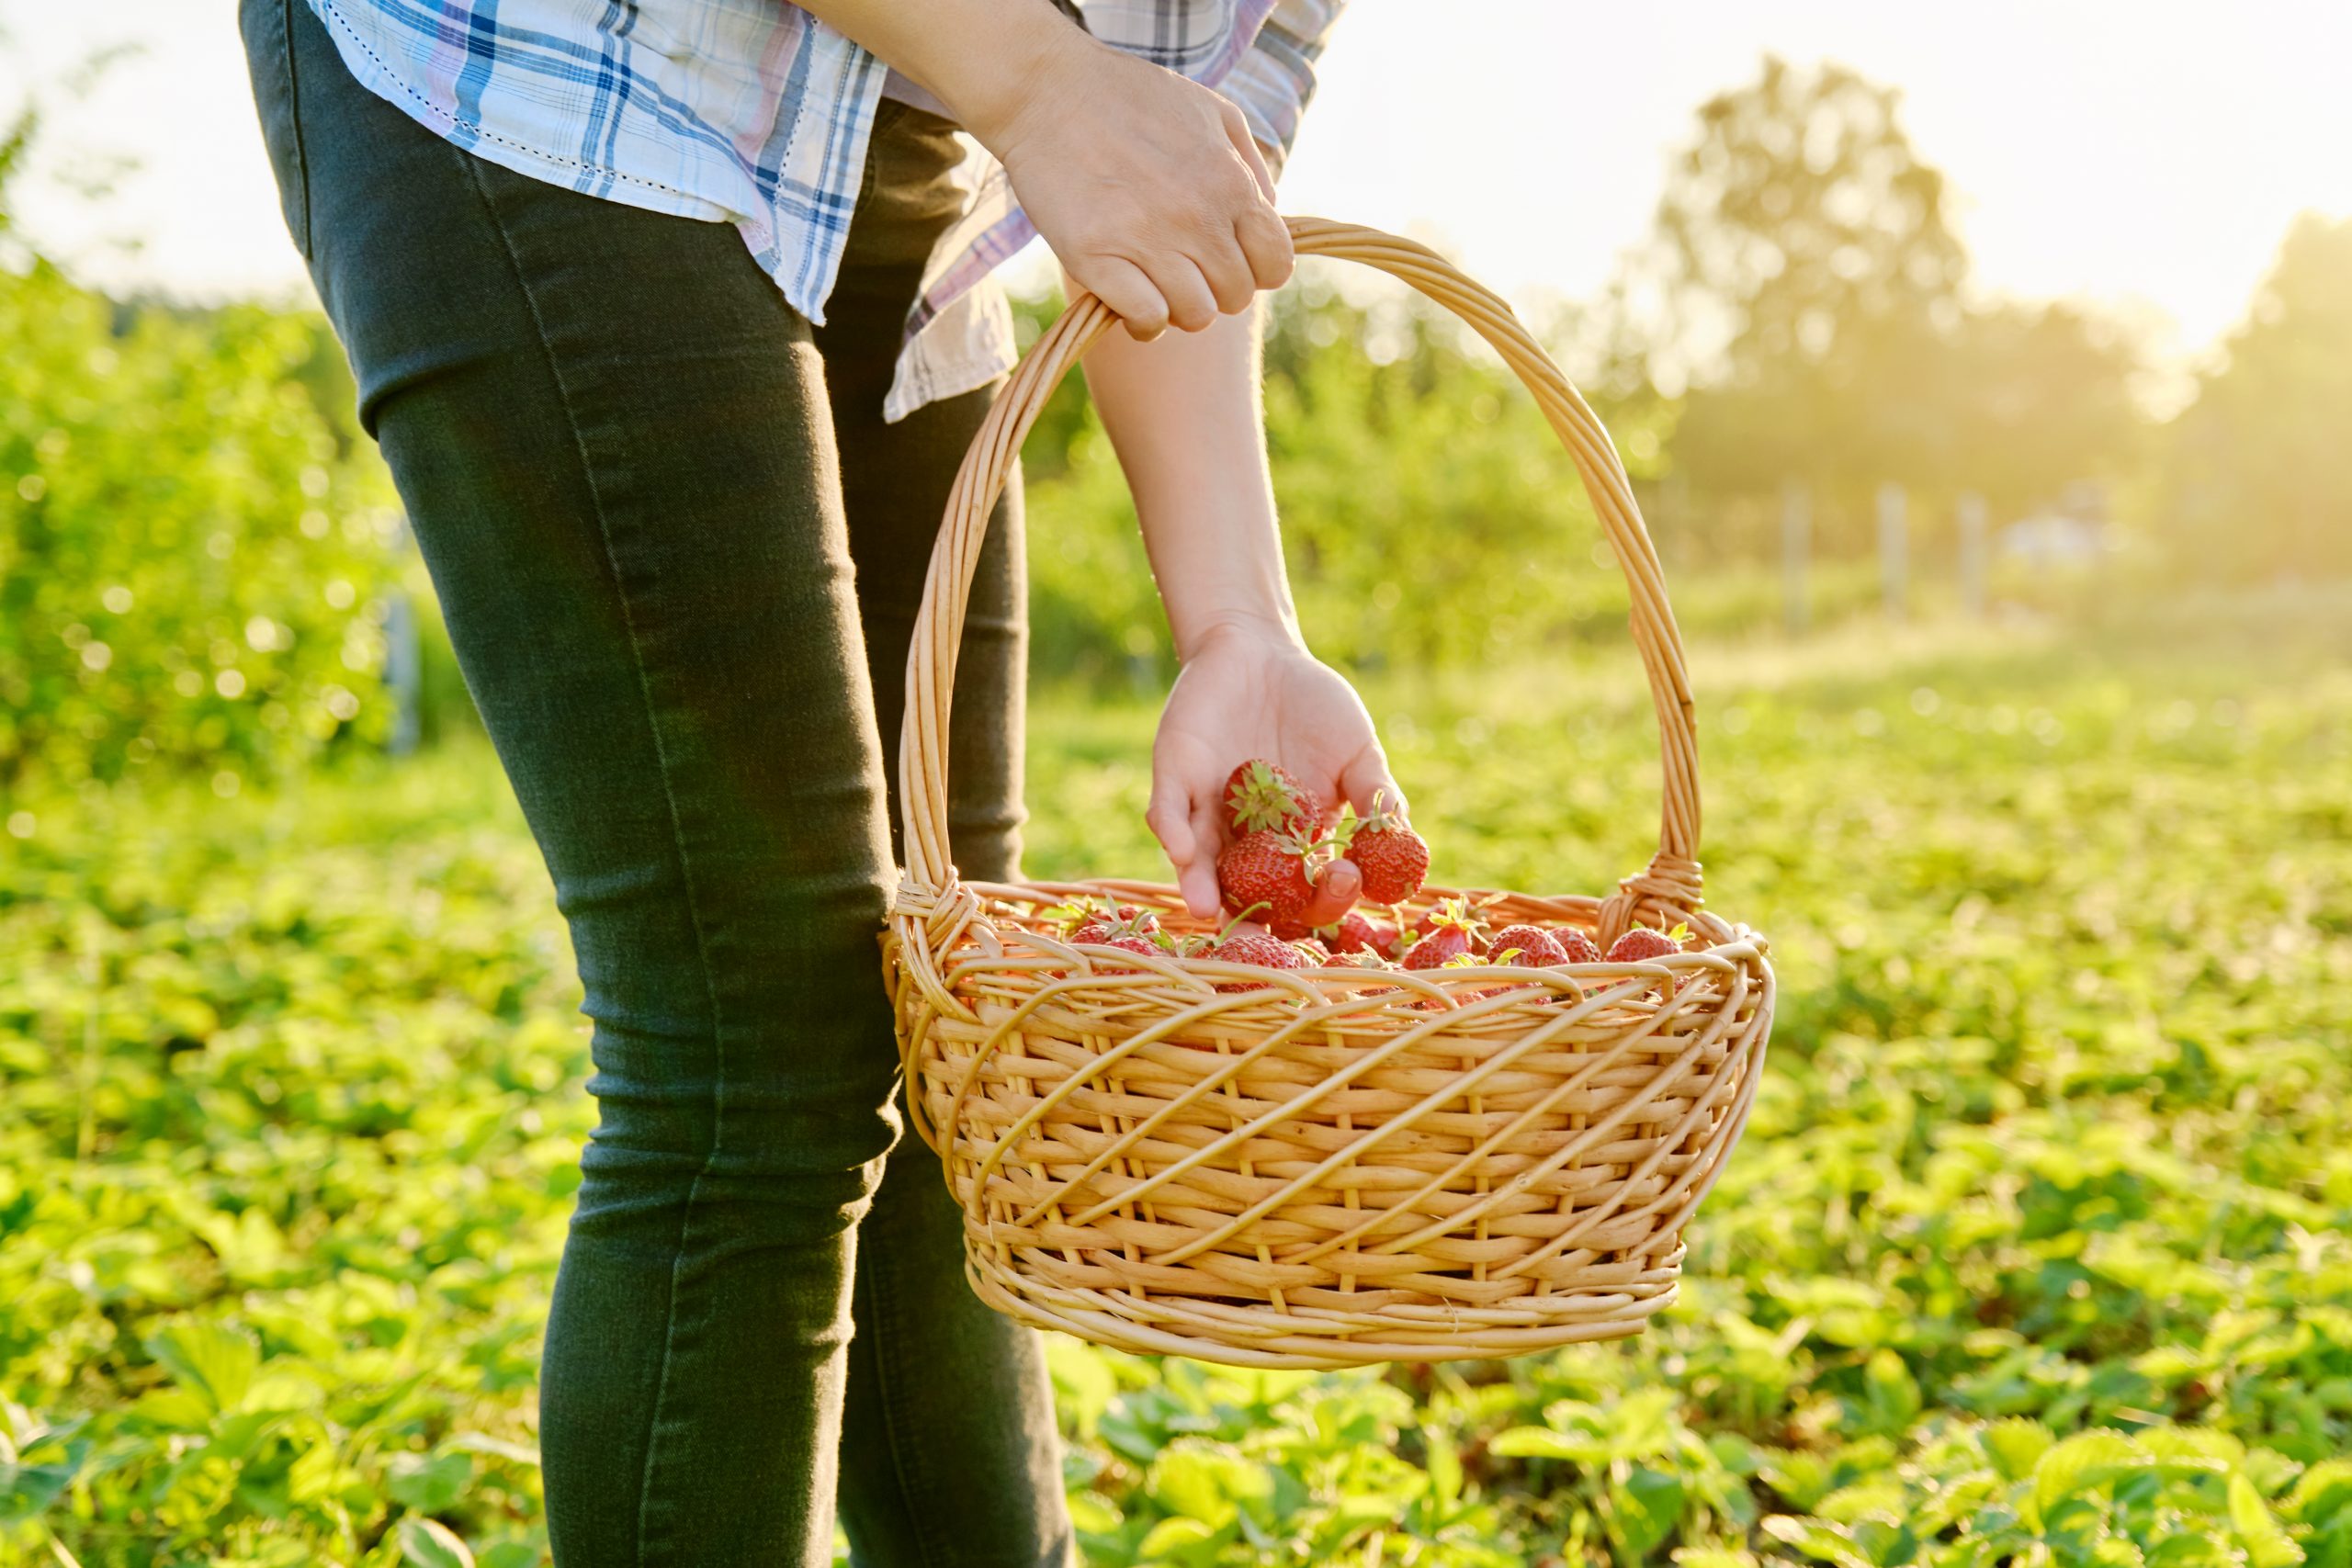 Best Berry Farms to Visit in 2023